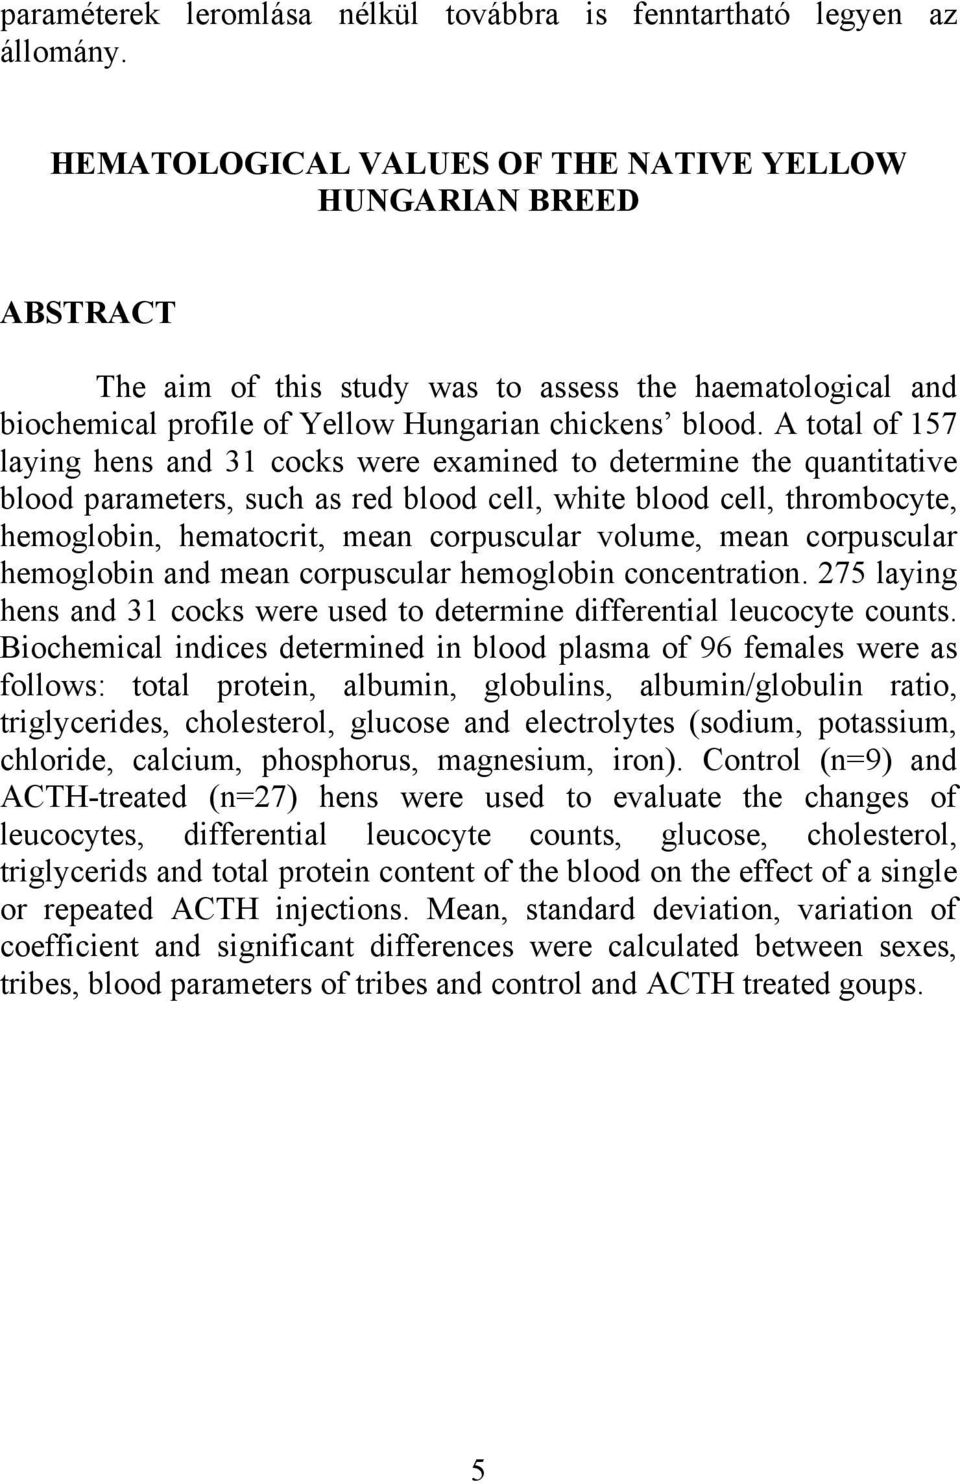 A total of 157 laying hens and 31 cocks were examined to determine the quantitative blood parameters, such as red blood cell, white blood cell, thrombocyte, hemoglobin, hematocrit, mean corpuscular